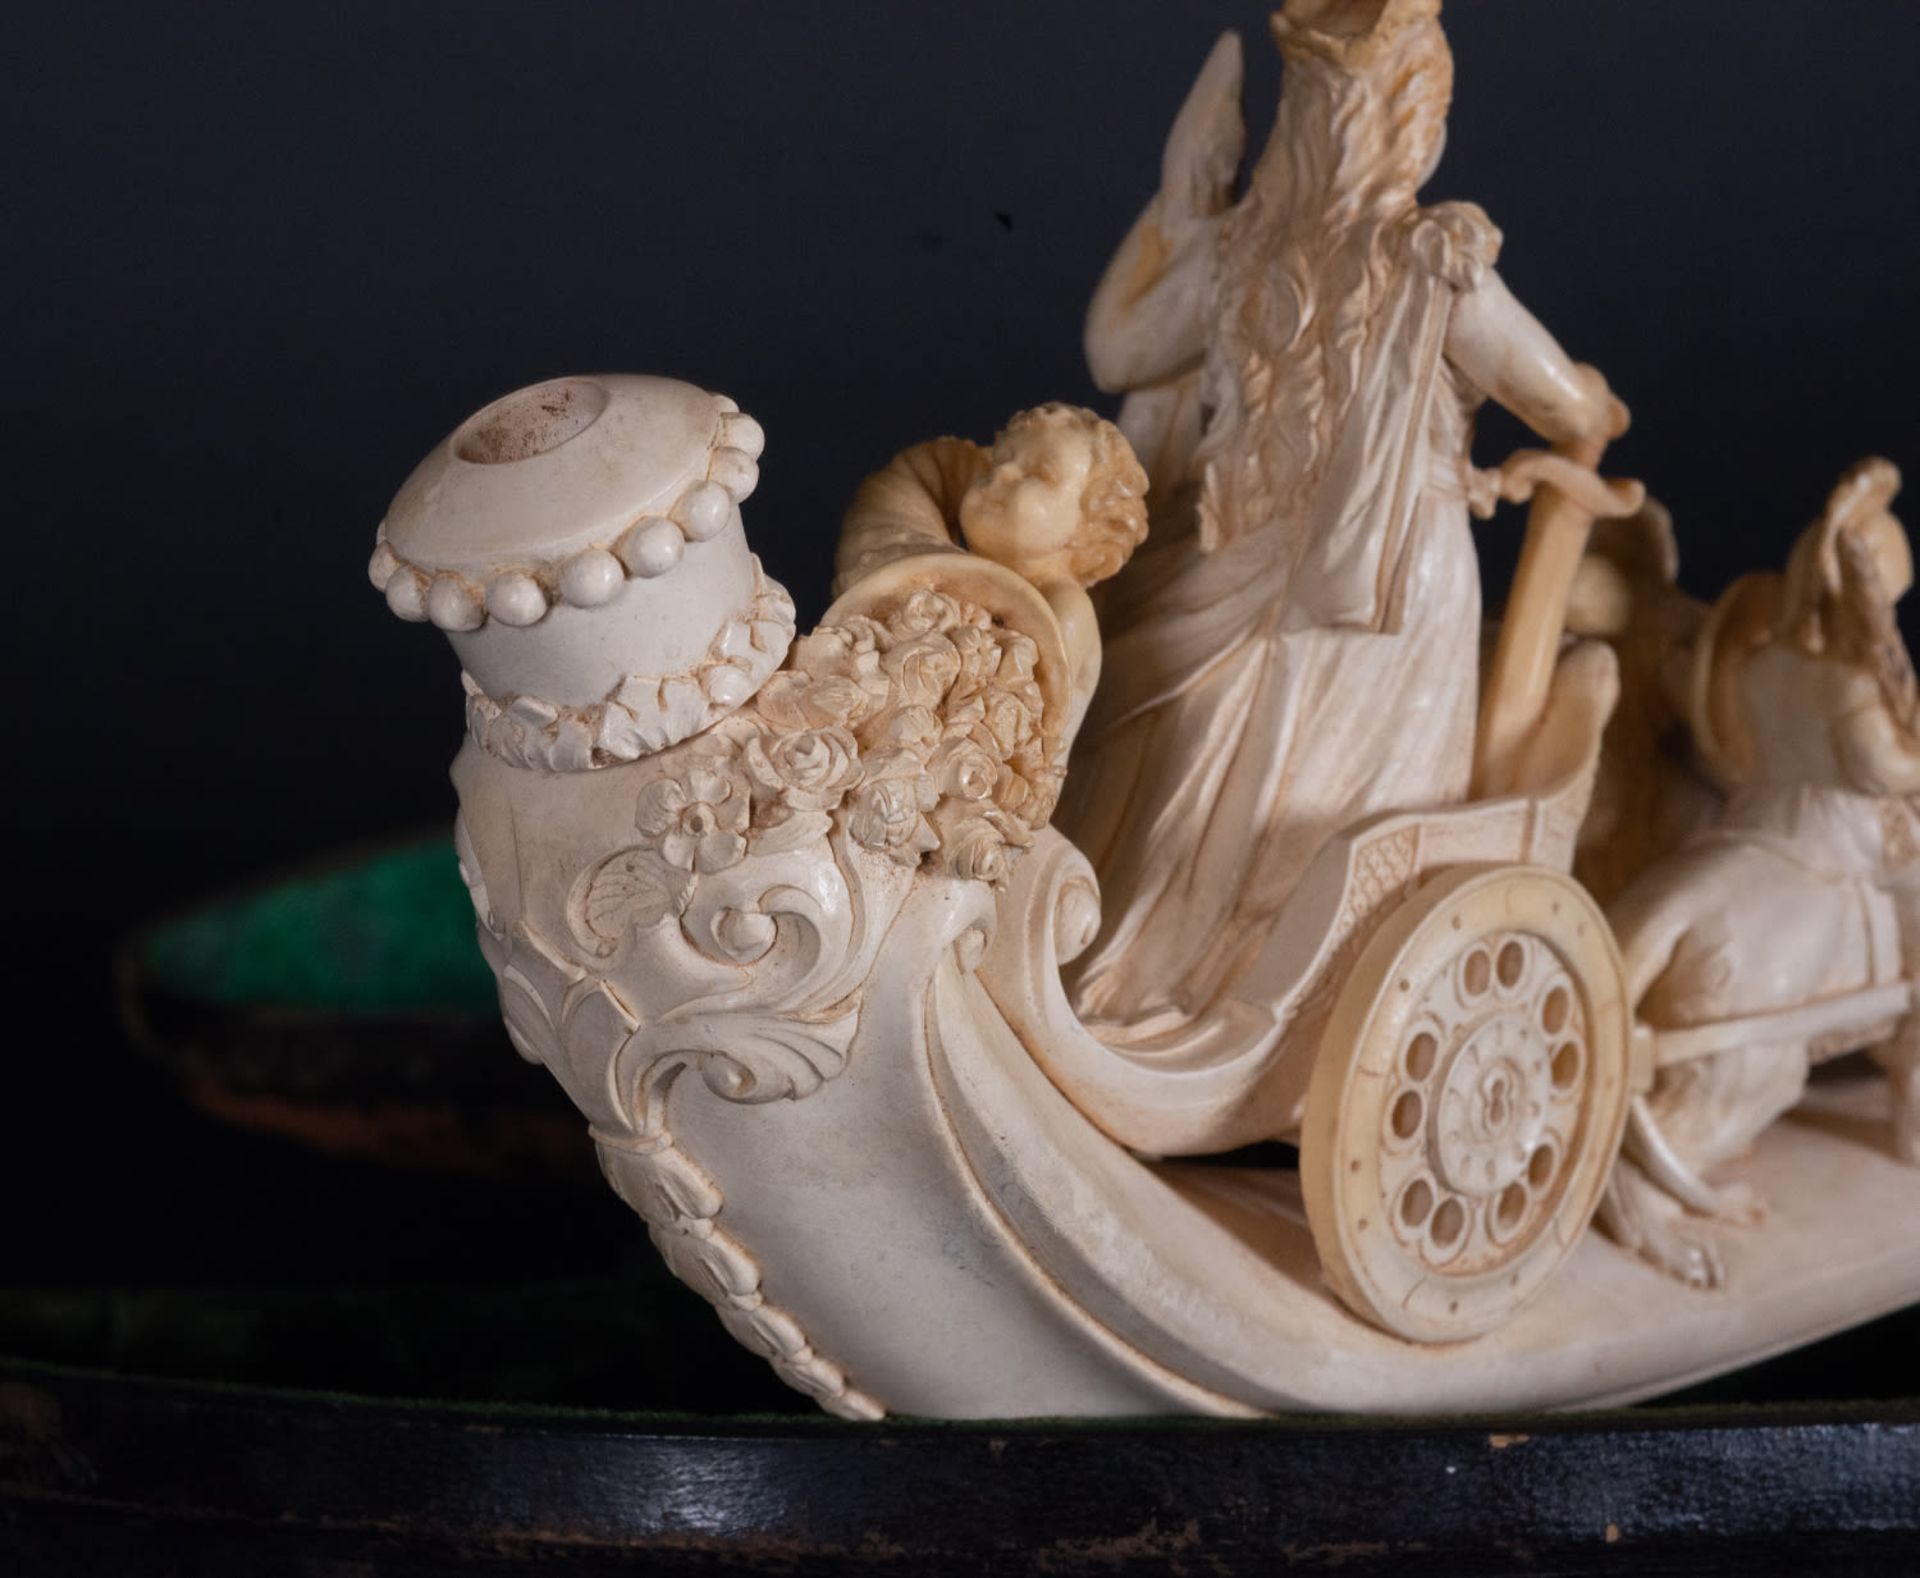 Rare and Exceptional Sea Foam Pipe and Amber Representing the Goddess Cibeles, 19th century - Image 3 of 15